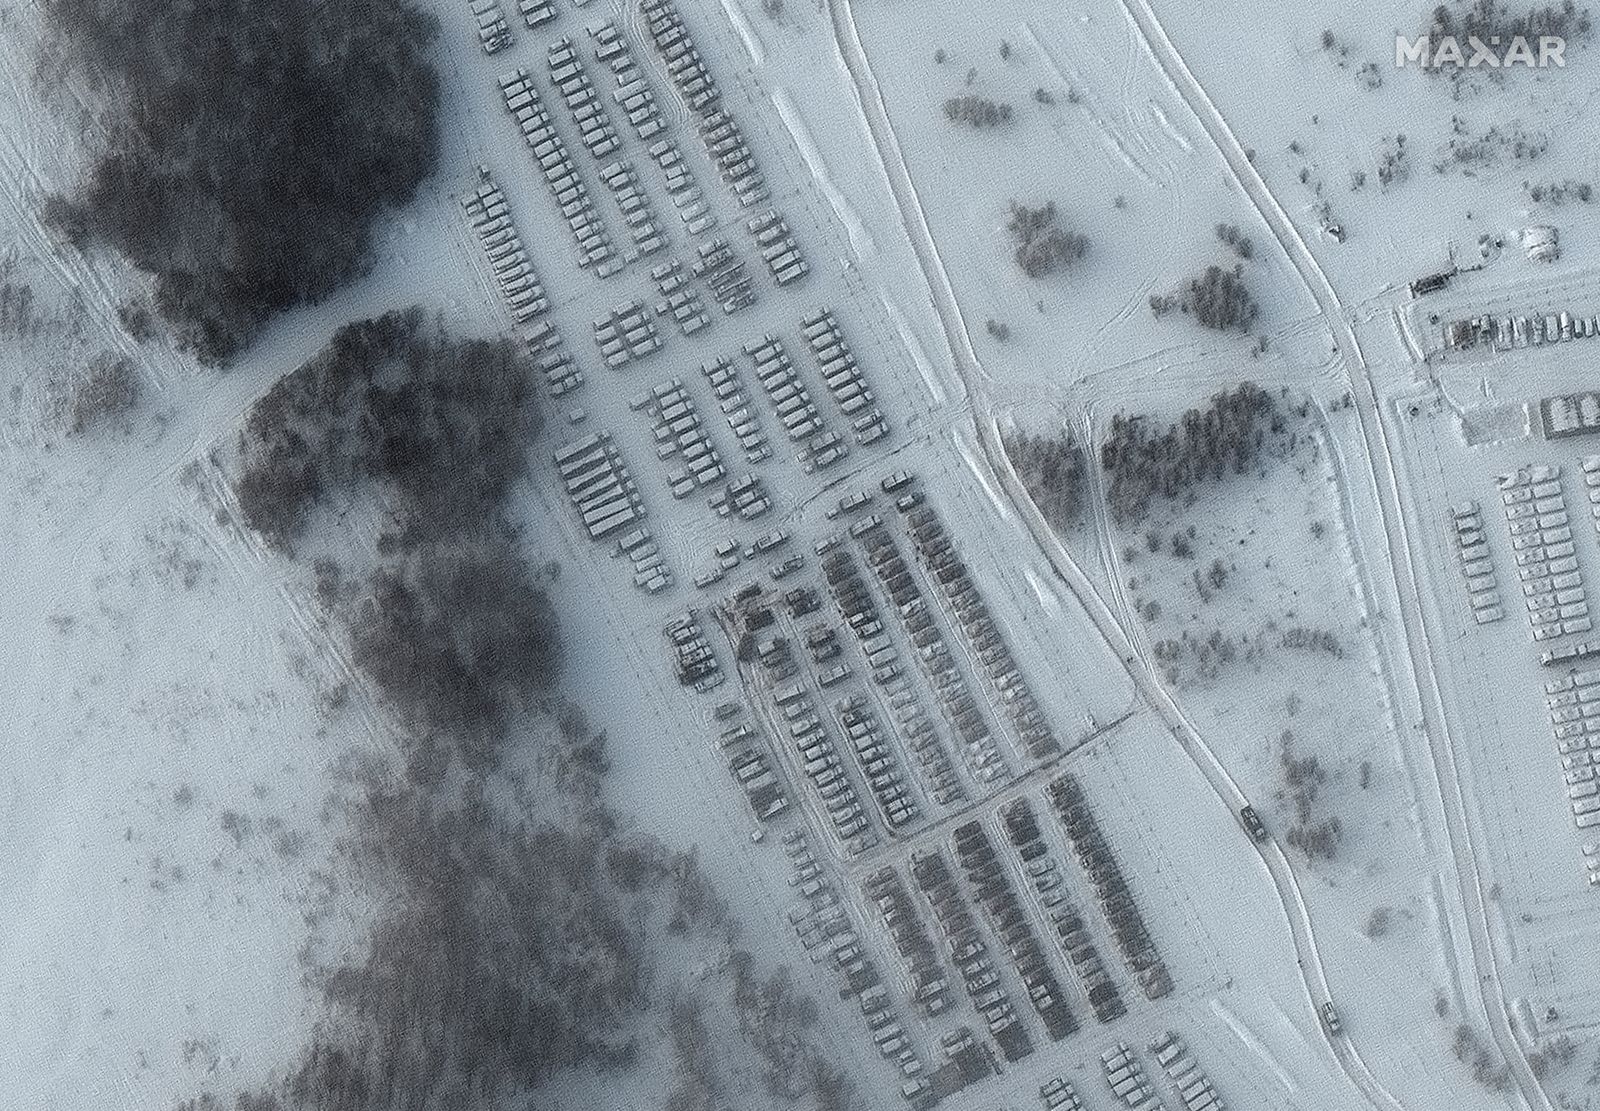 A closer view of tanks and support equipment in Yelnya, Russia is seen in this Maxar satellite image taken on January 19, 2022 - via REUTERS